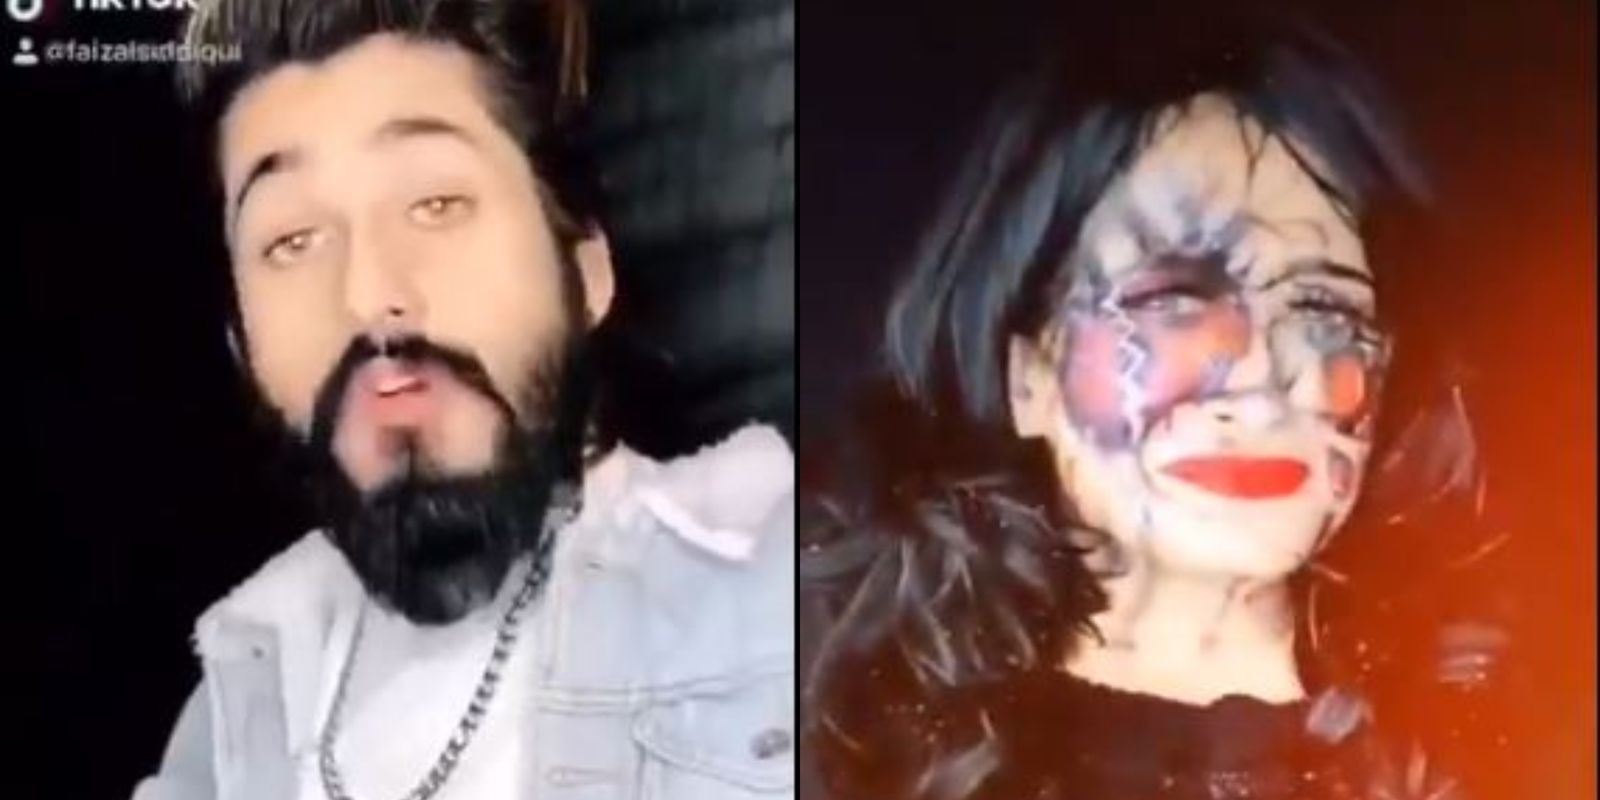 Tik Tok Star Faizal Siddiqui's Account Banned After Celebs Lash Out At His Video Glorifying Acid Attacks